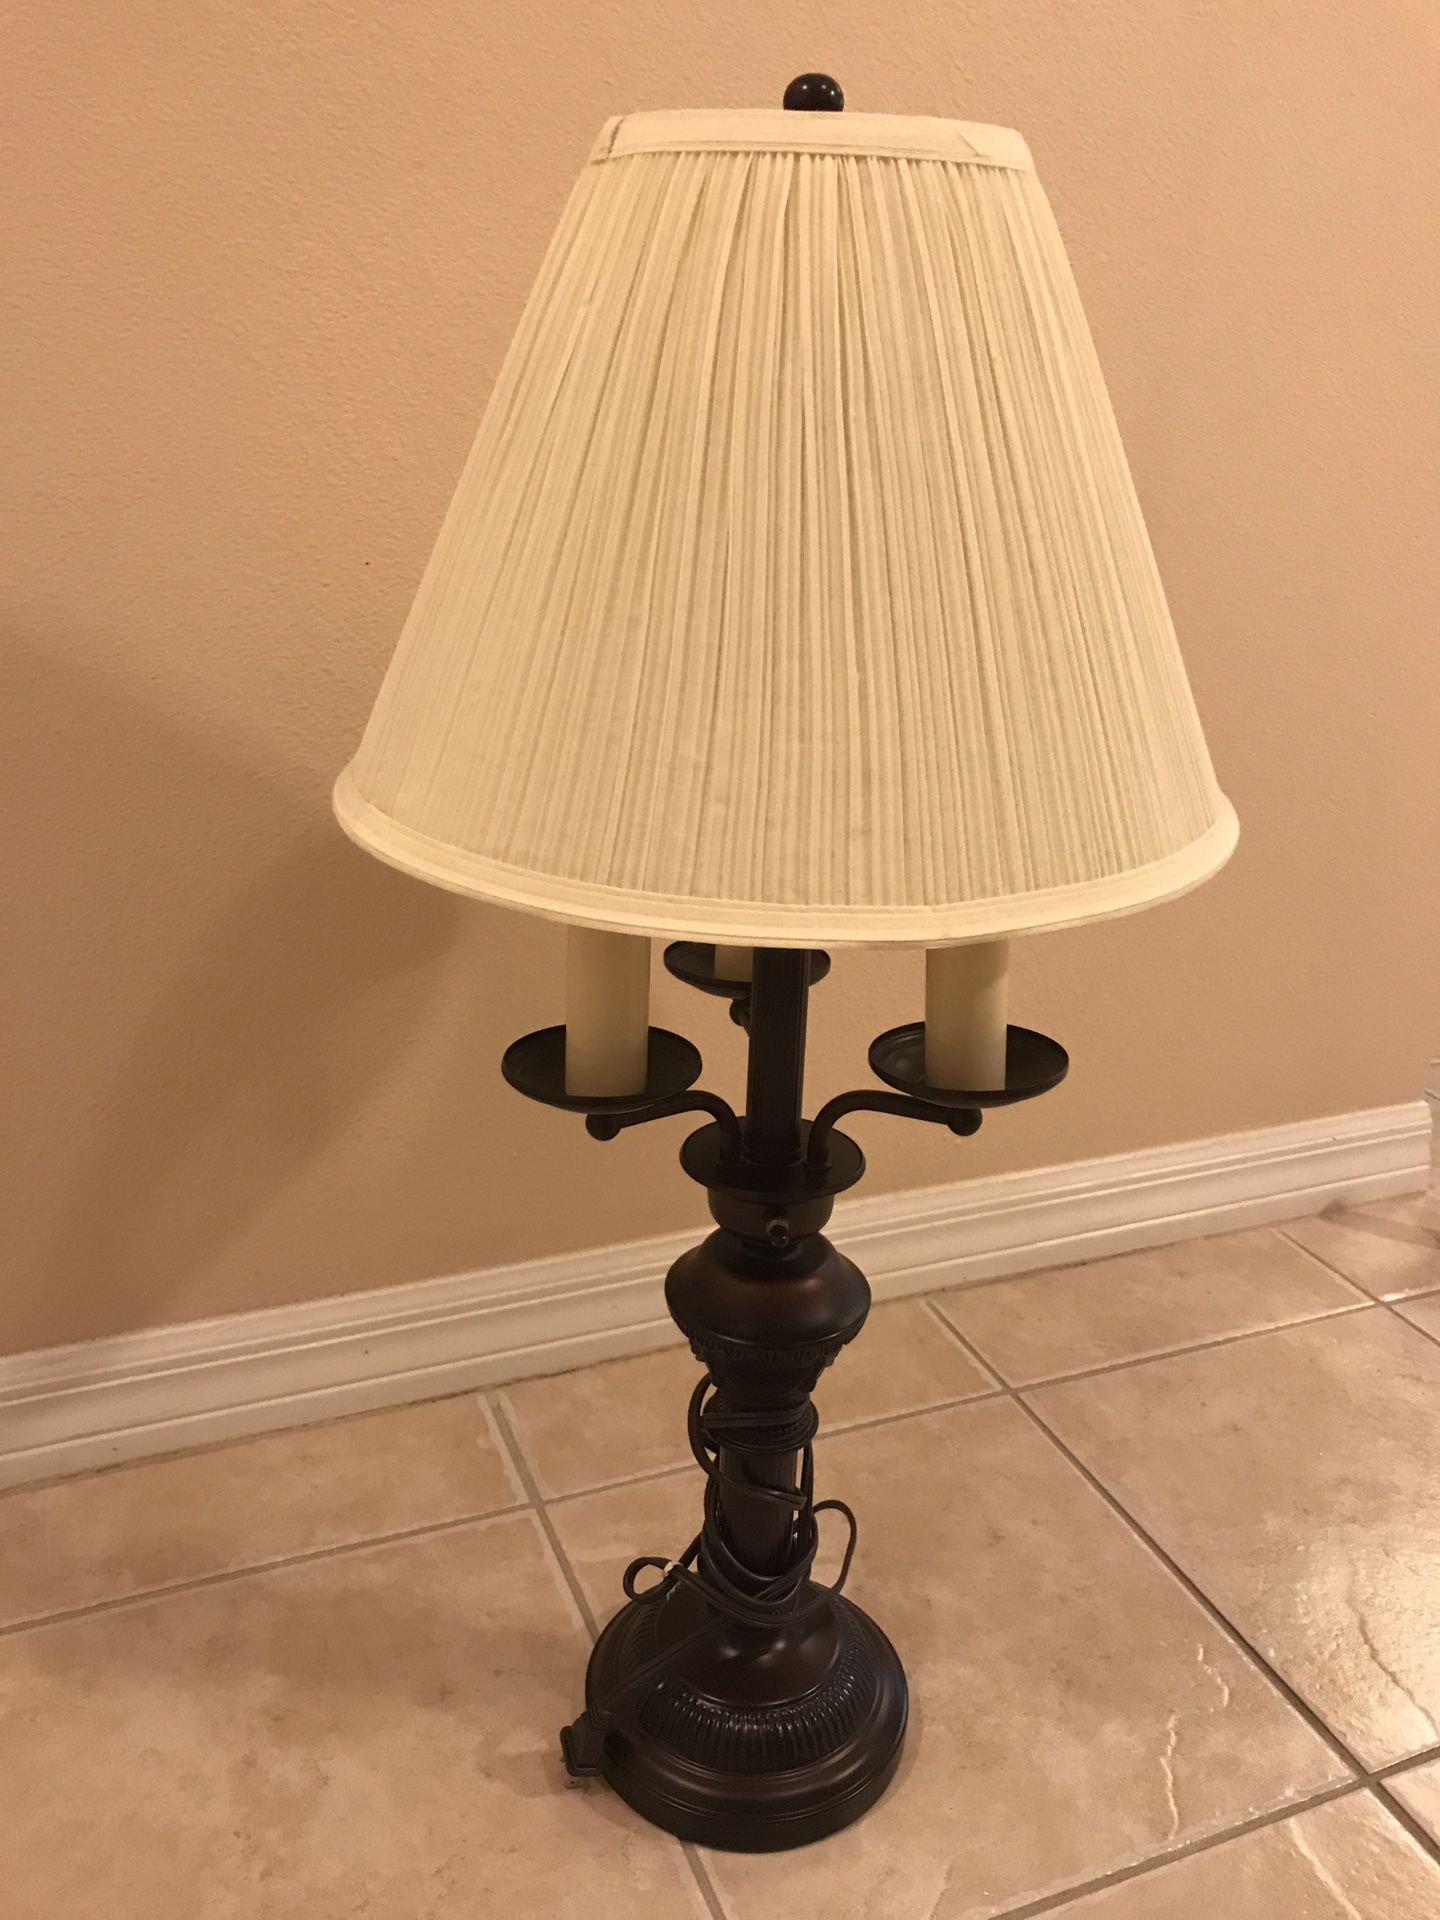 Tall Table Lamp 4 way switch